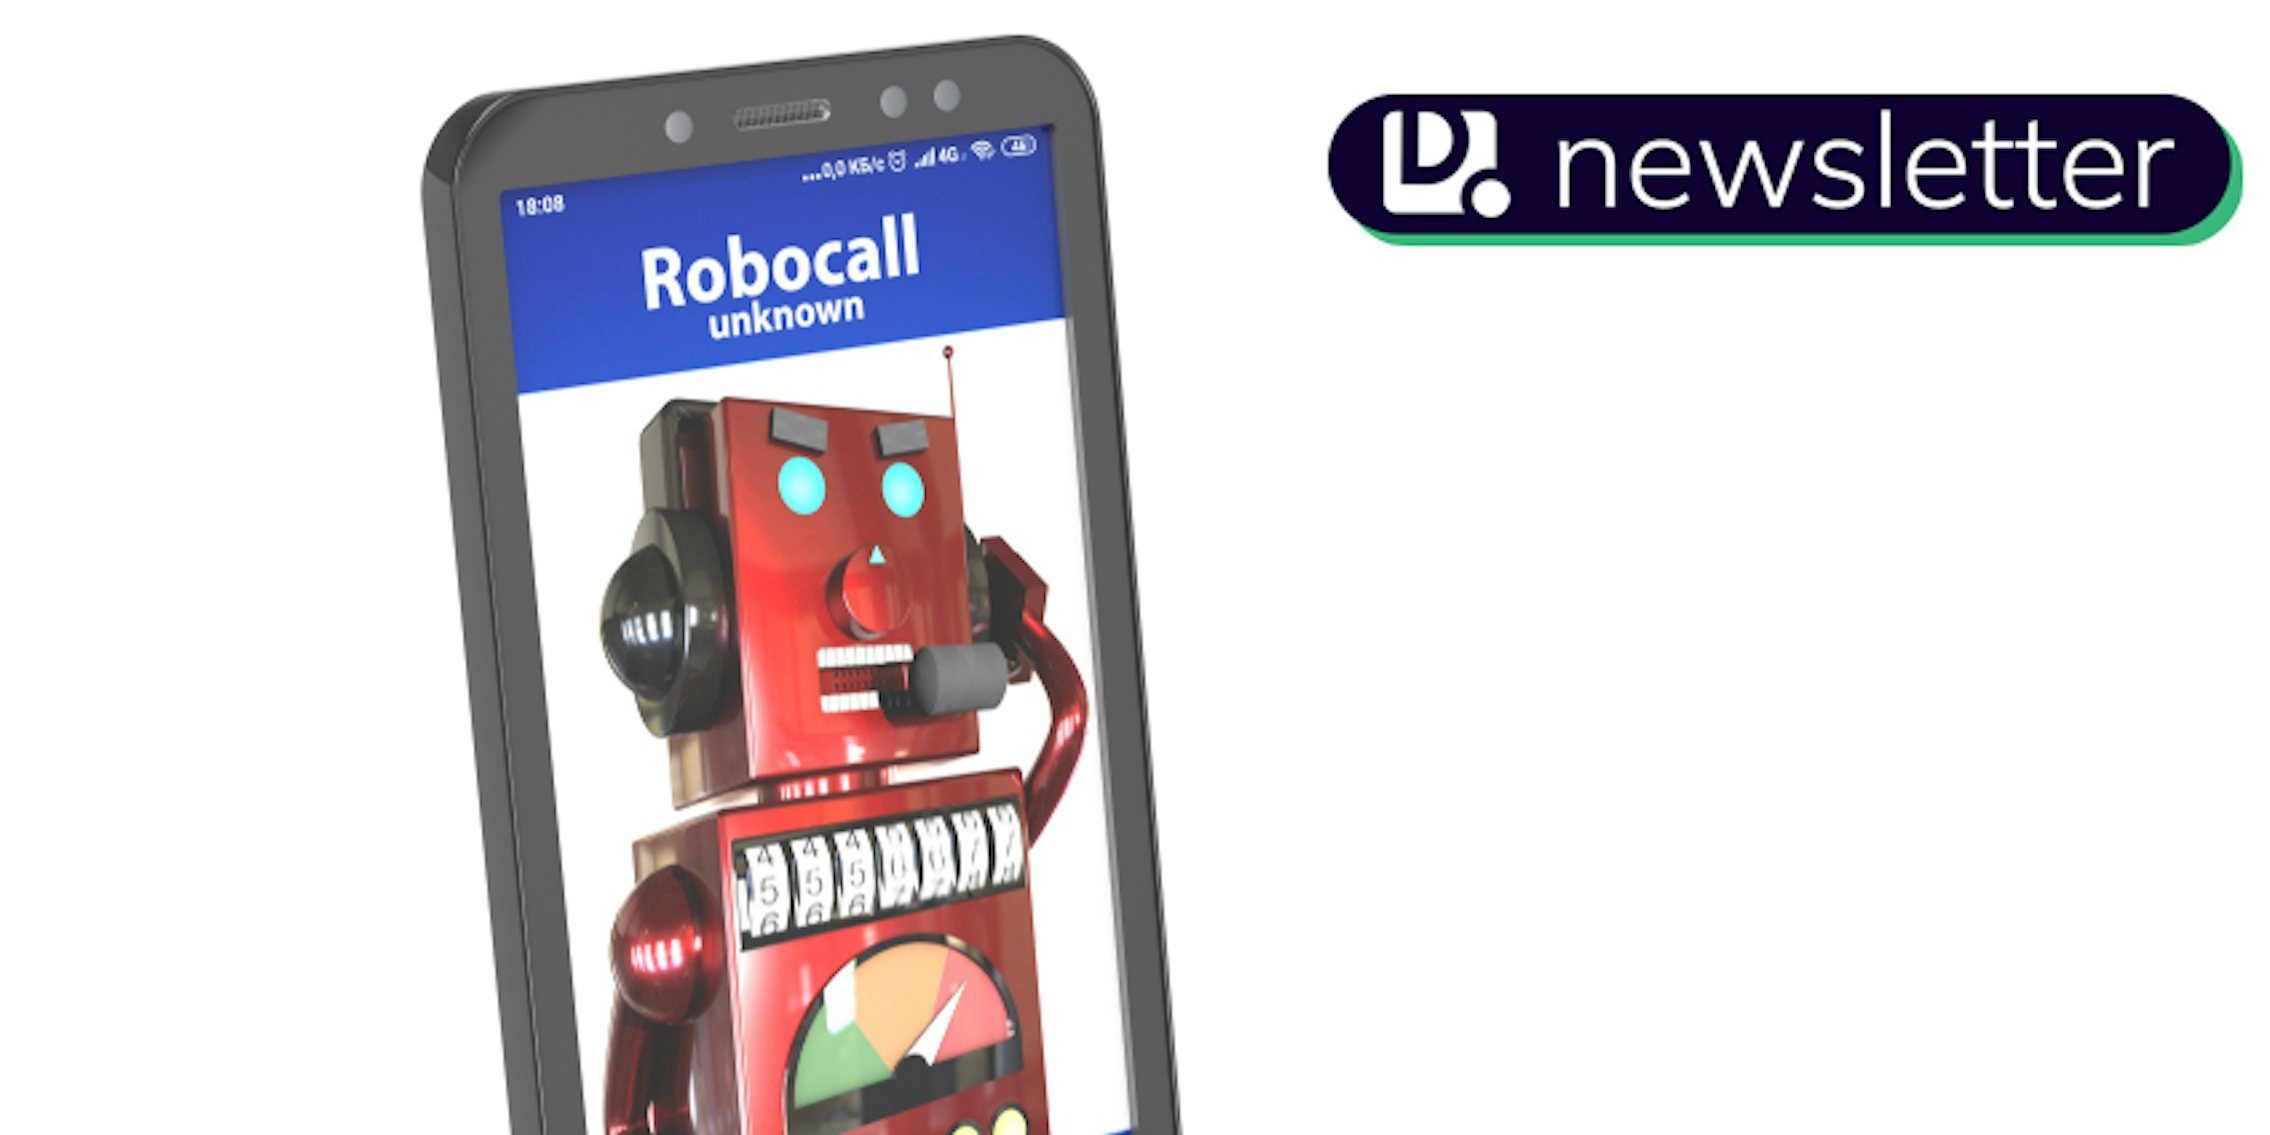 An illustration of a mobile phone showing a red robot calling. The Daily Dot newsletter logo is in the top right corner.